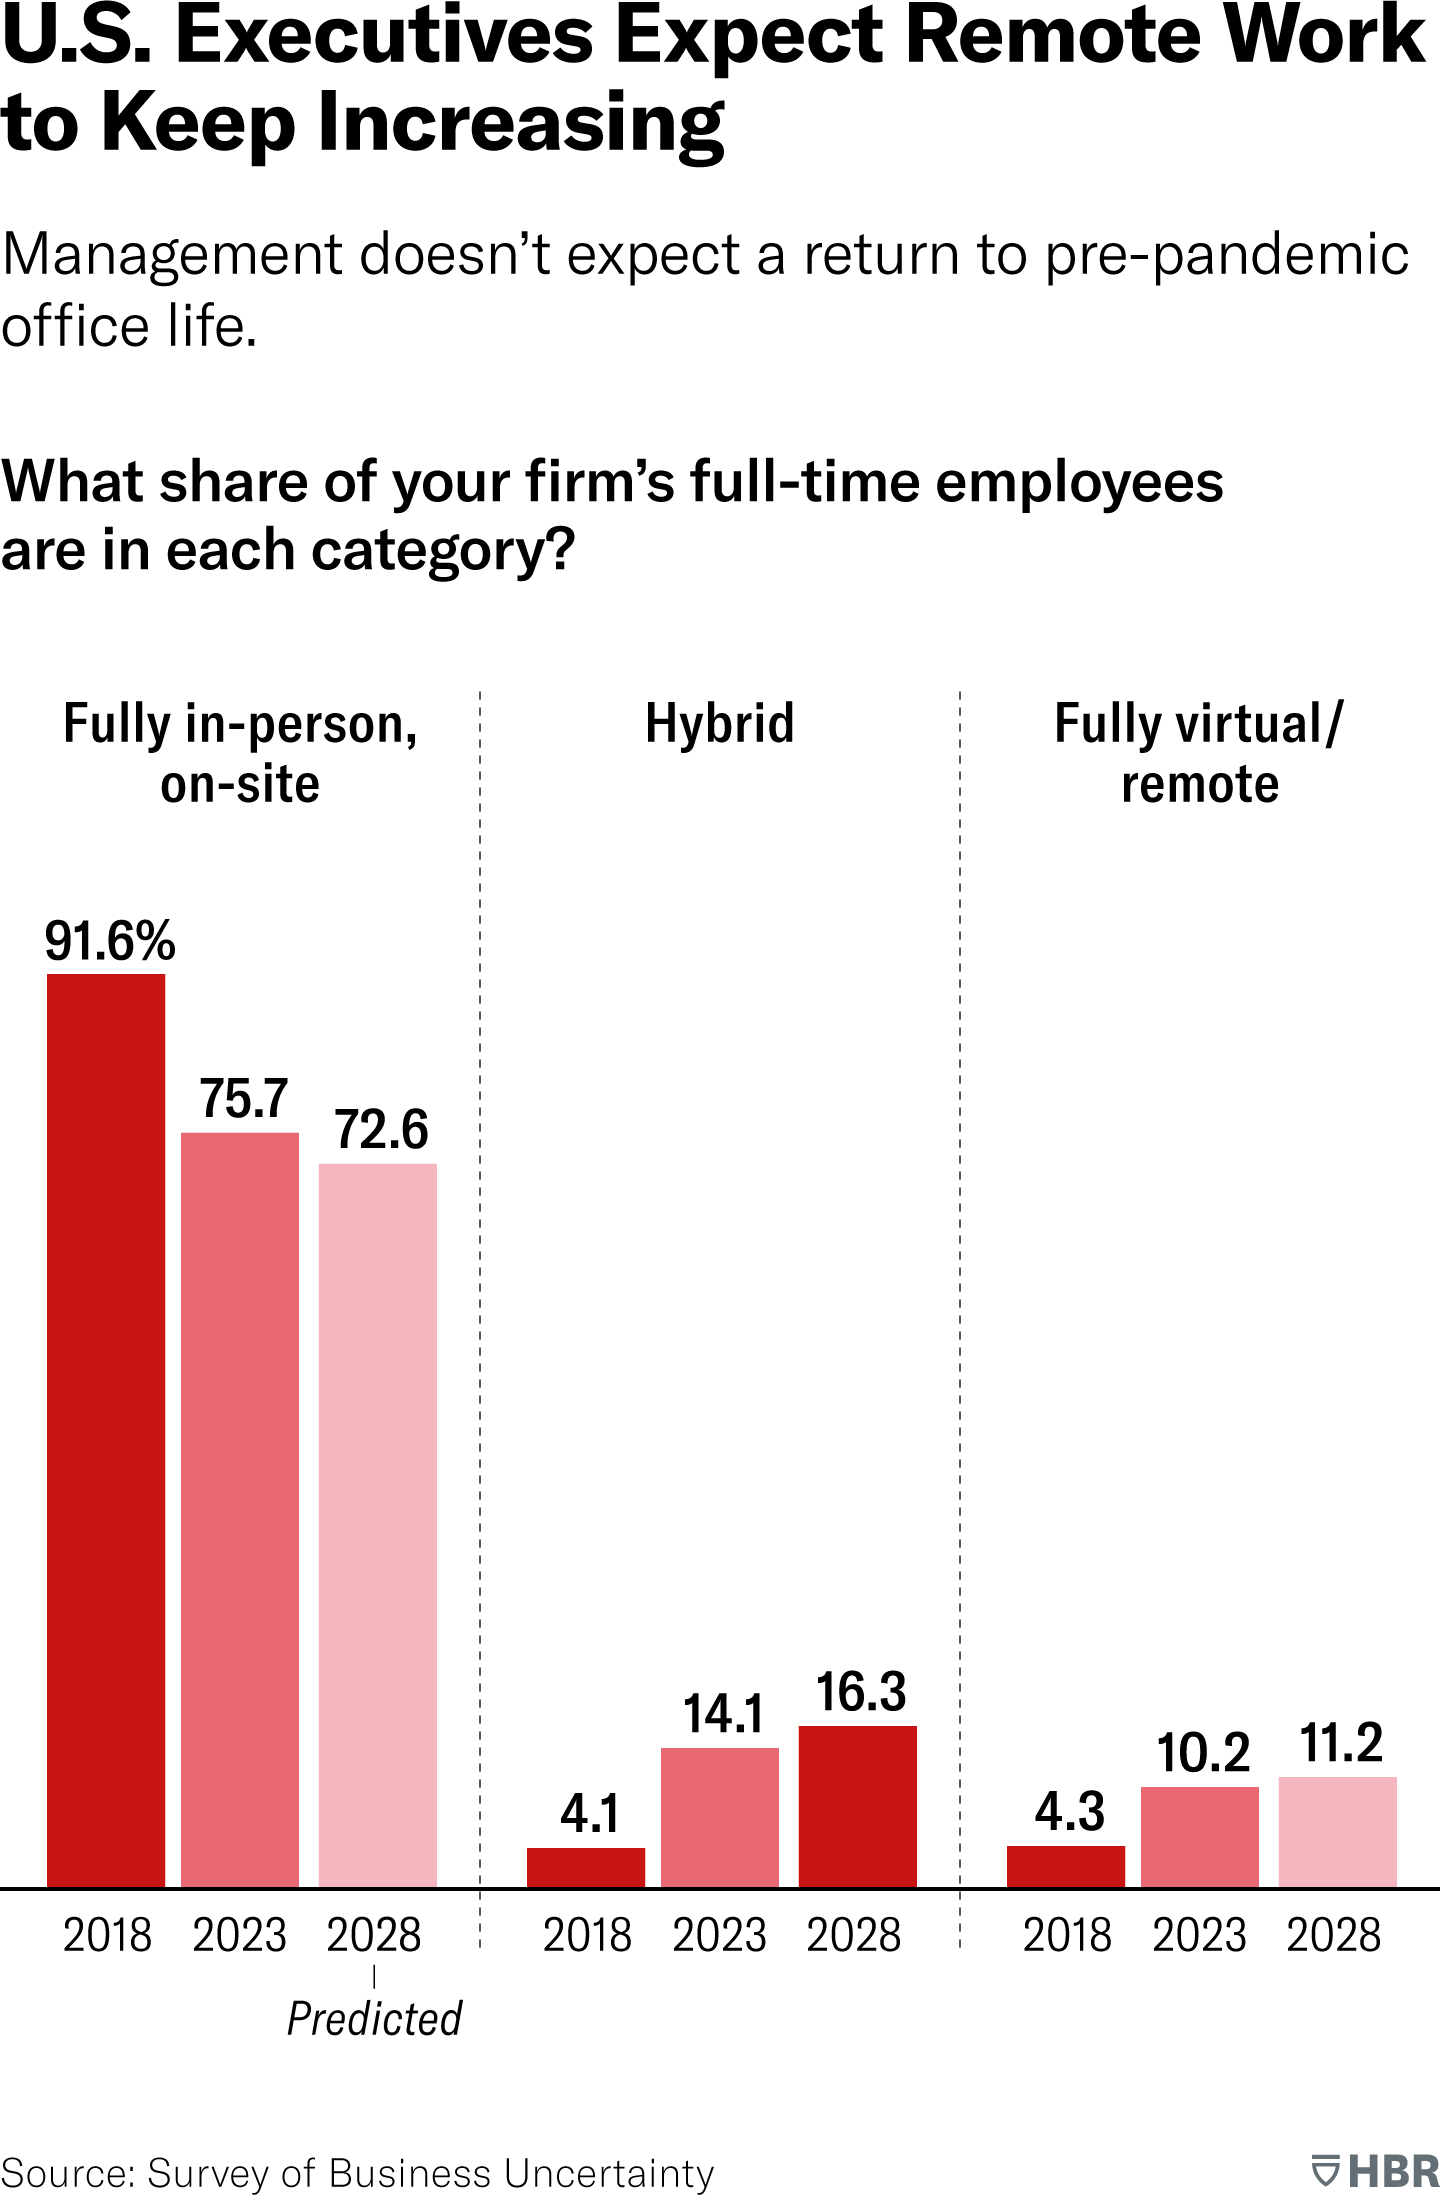 Management doesn’t expect a return to pre-pandemic office life. This bar chart shows the results of a survey in which respondents were asked what share of their full-time employees are (or will be) fully in person, hybrid, or fully virtual/remote, in the years 20 18, 20 23, and 2028.Fully in-person, on-site: 91.6 percent in 20 18, 75.7 percent in 20 23, and 72.6 percent in 2028.<br />
Hybrid: 4.1 percent in 20 18, 14.1 percent in 20 23, and 16.3 percent in 2028.<br />
Fully virtual/remote: 4.3 percent in 20 18, 10.2 percent in 20 23, and 11.2 percent in 20 28.Source: Survey of Business Uncertainty.<br />
